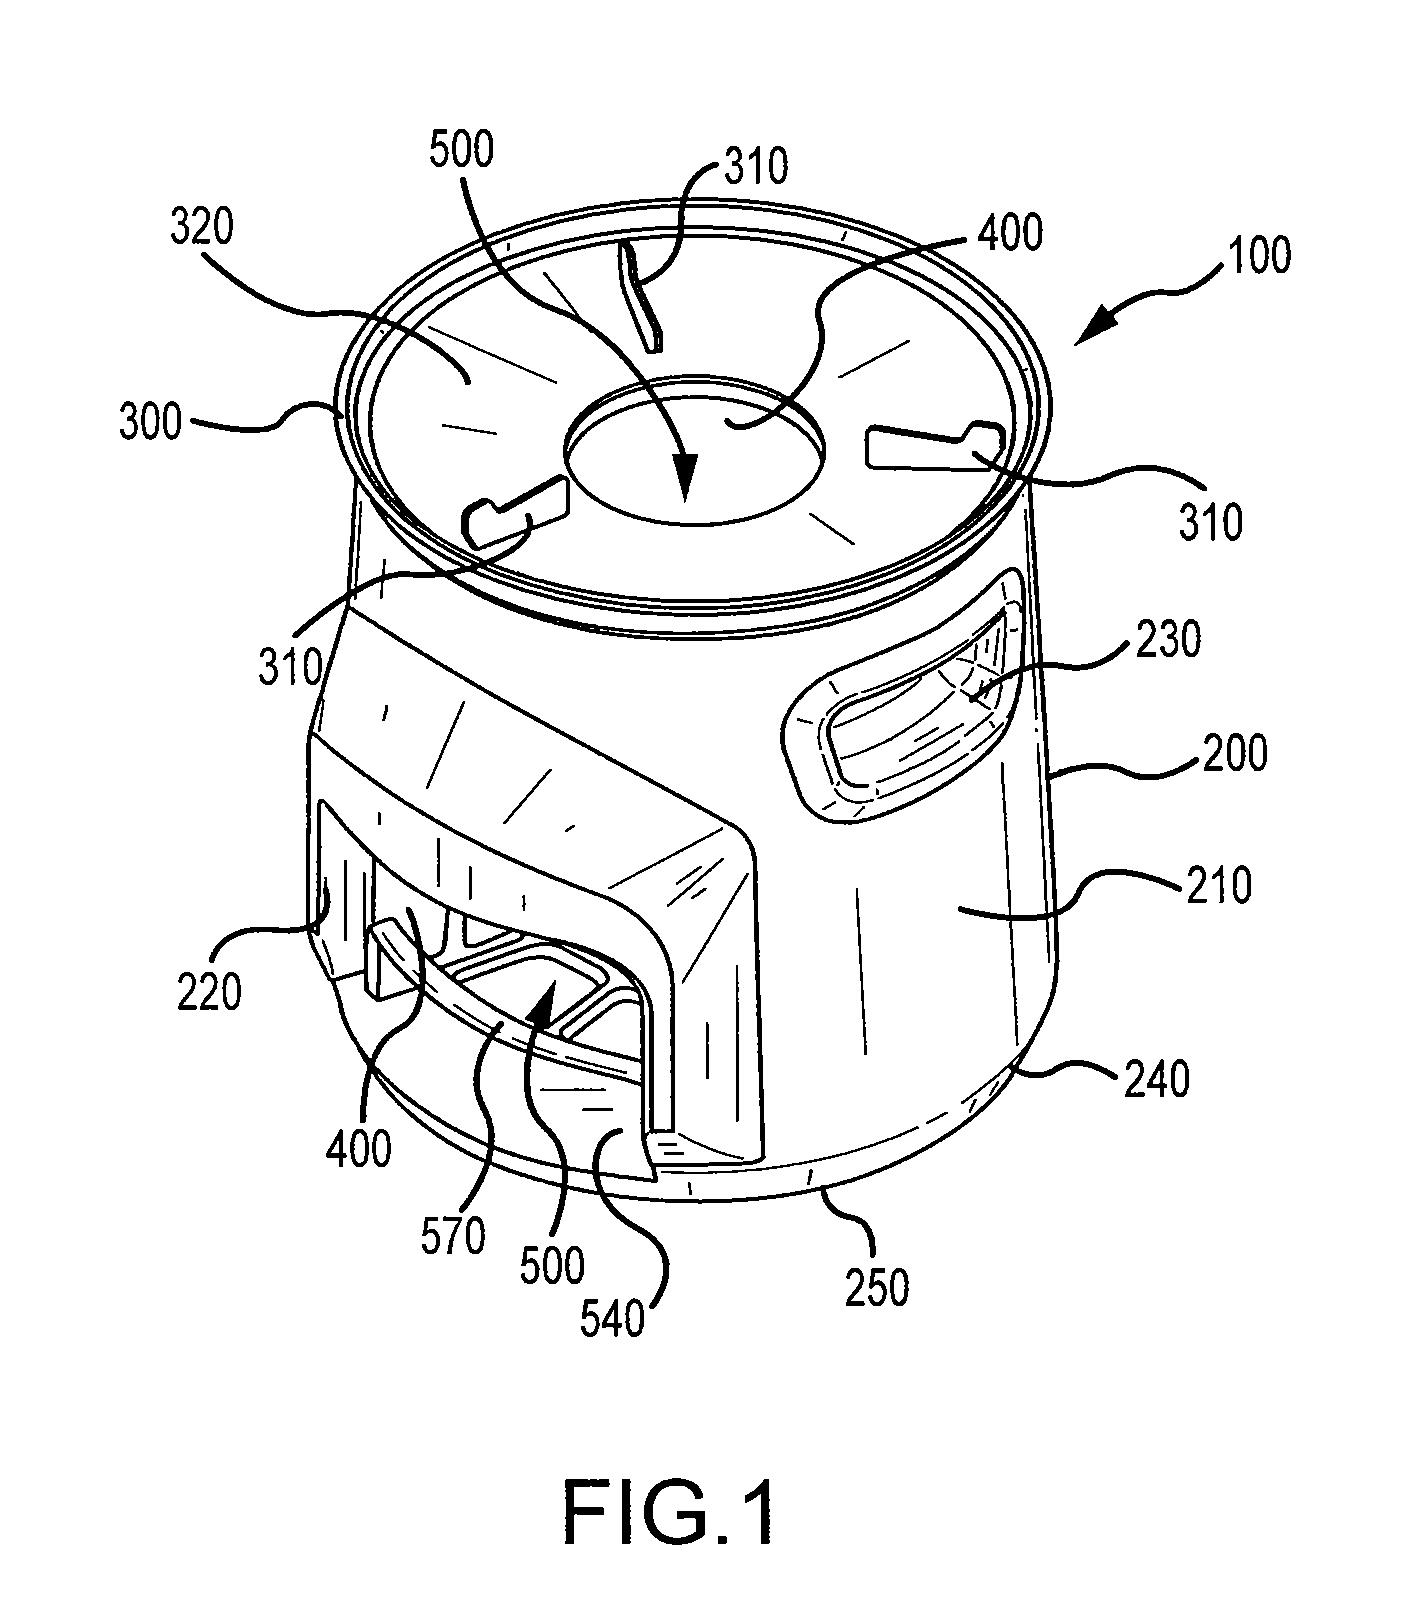 Cook stove assembly